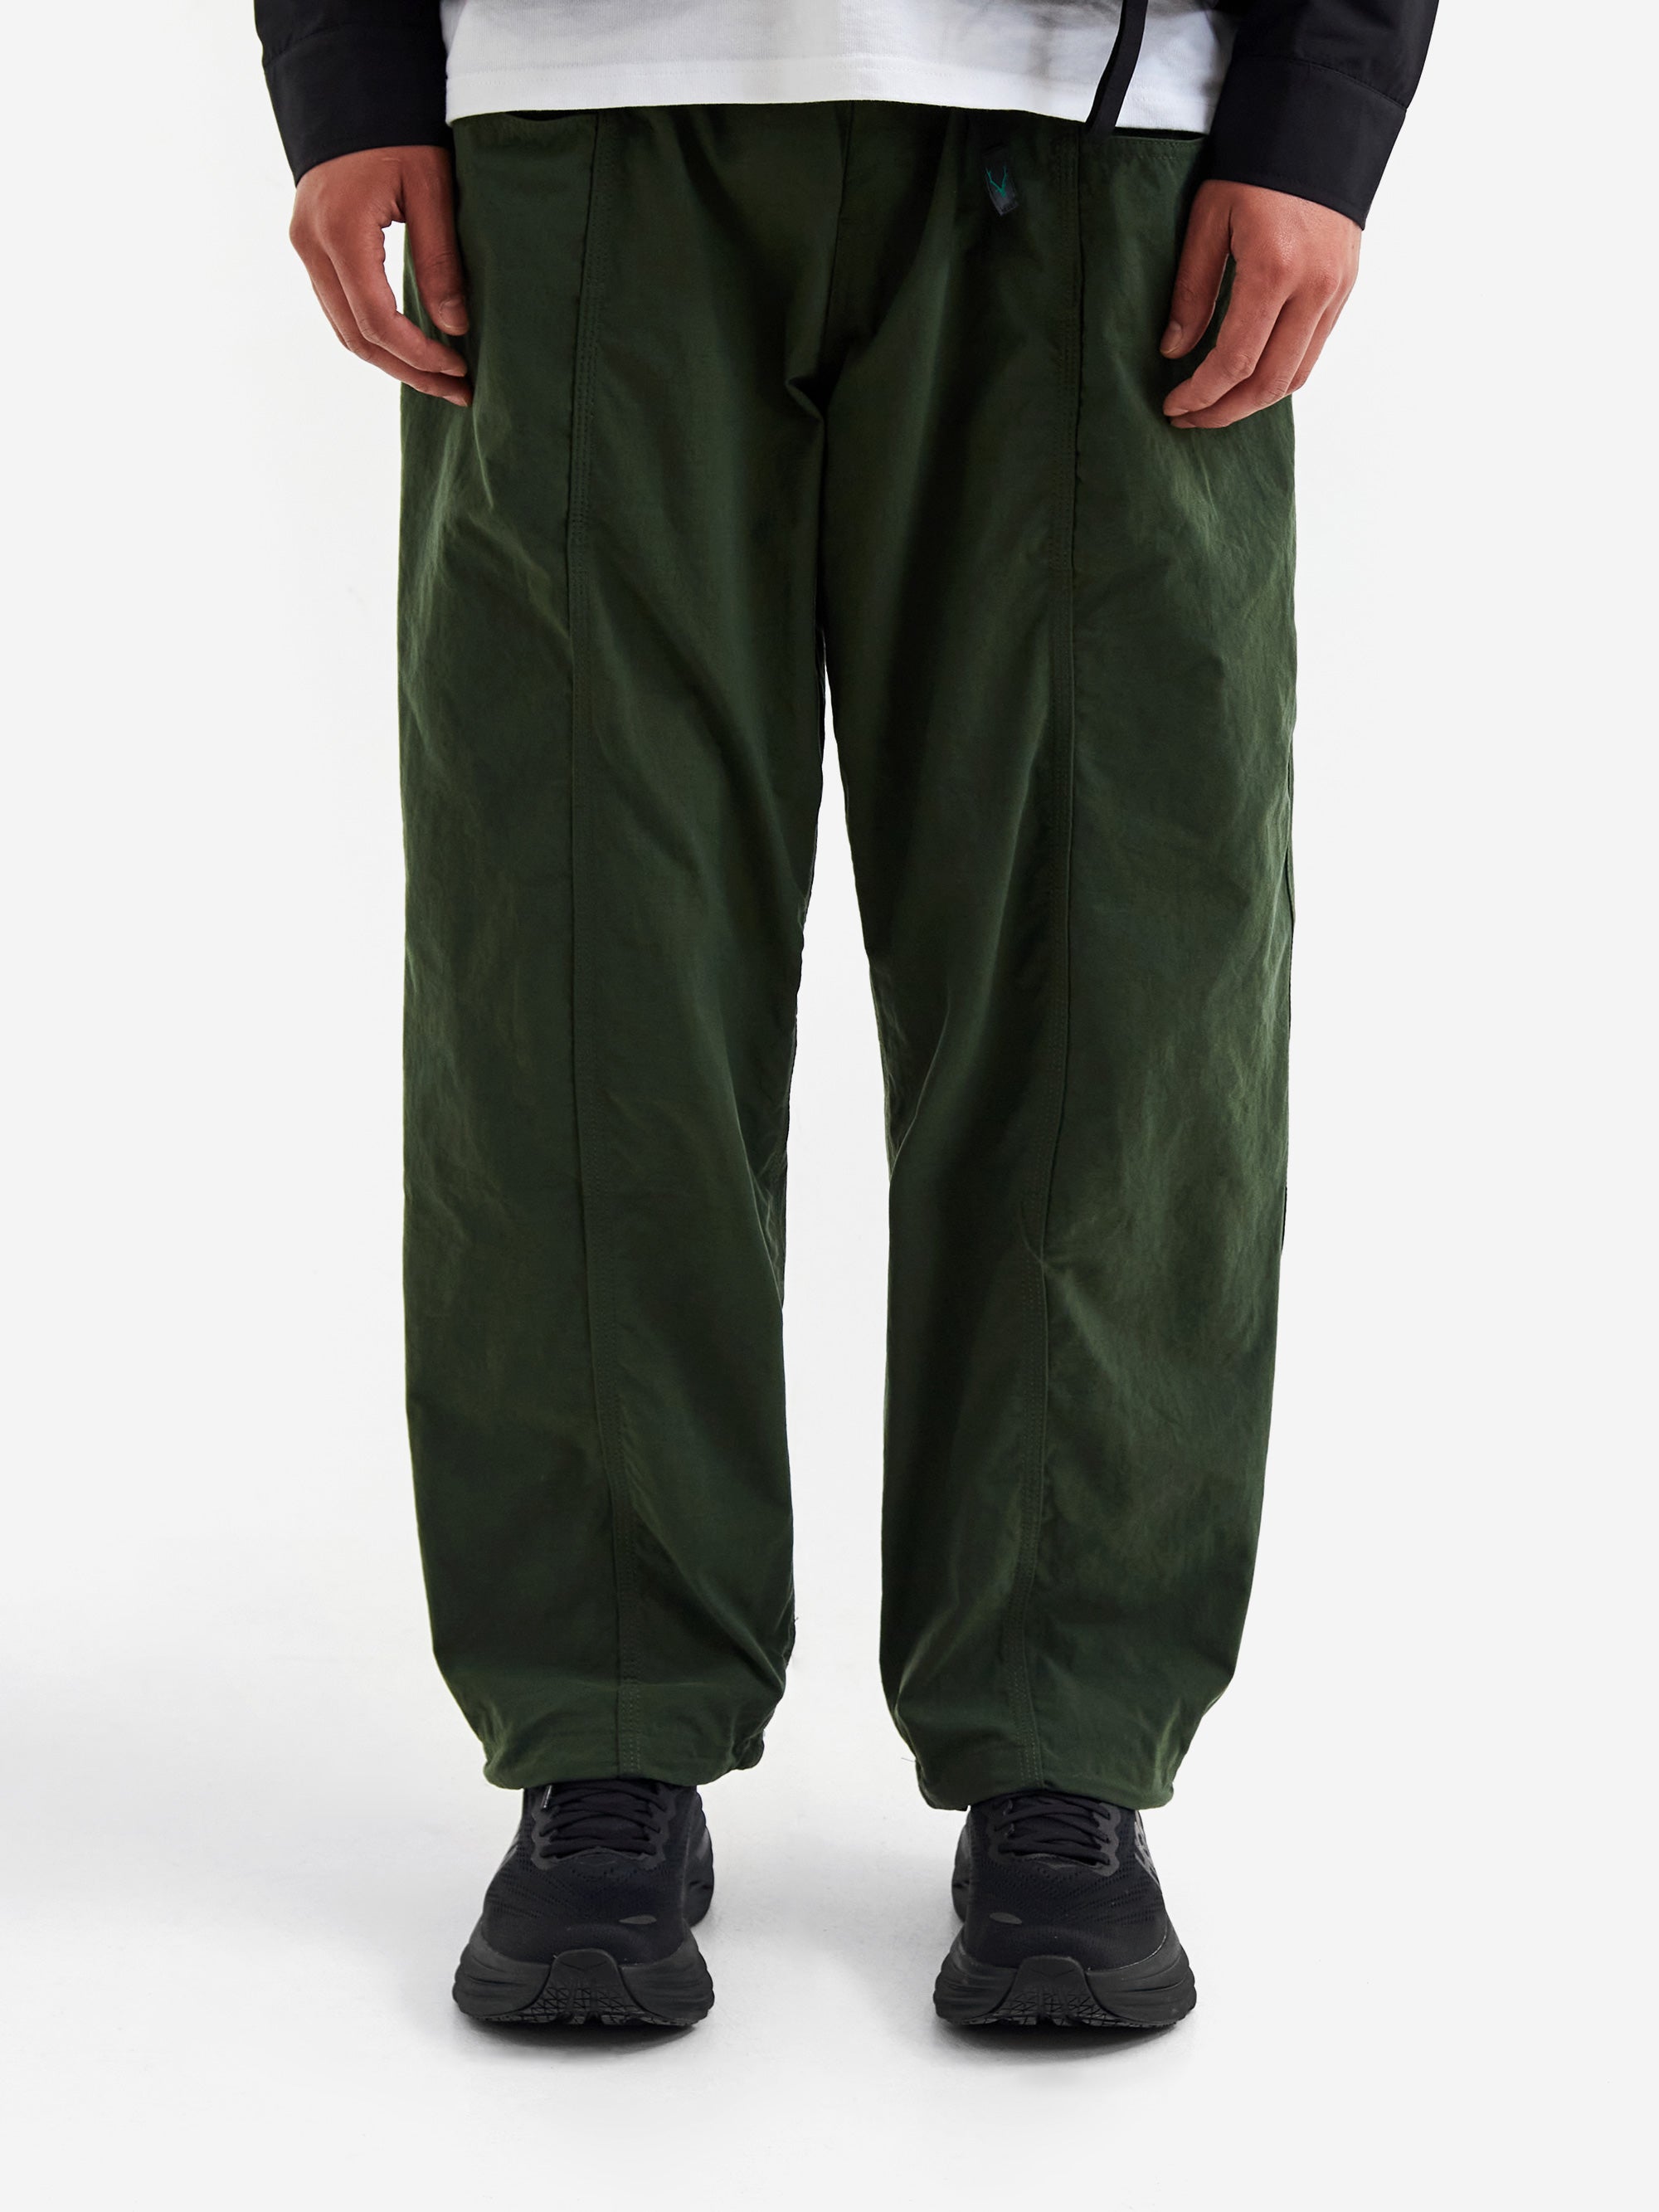 South2 West8 23ss BELTED C.S. PANT パンツ - 通販 - gofukuyasan.com